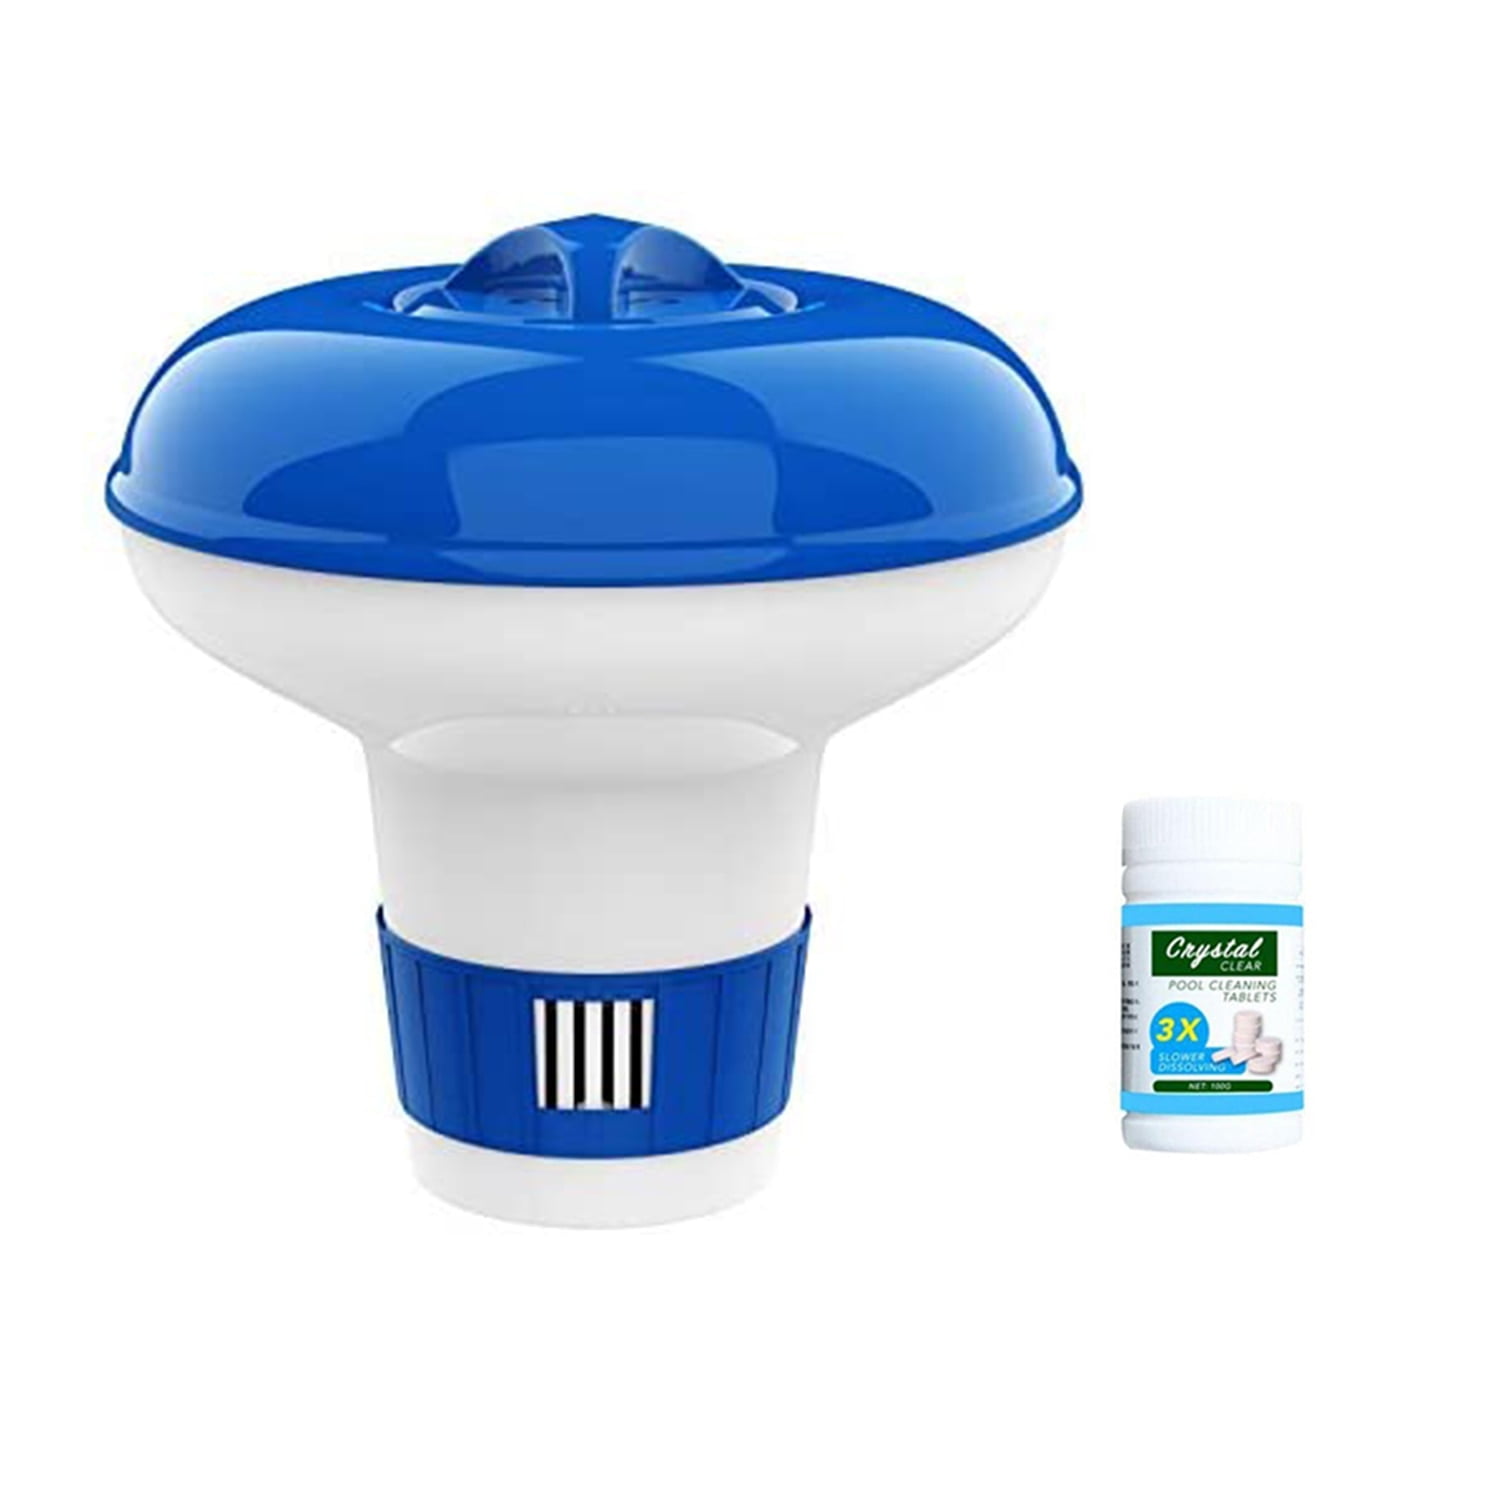 Swimming Pool Hot Tub Cleaning 100 Tablet Floating Chlorine Chemical Dispenser